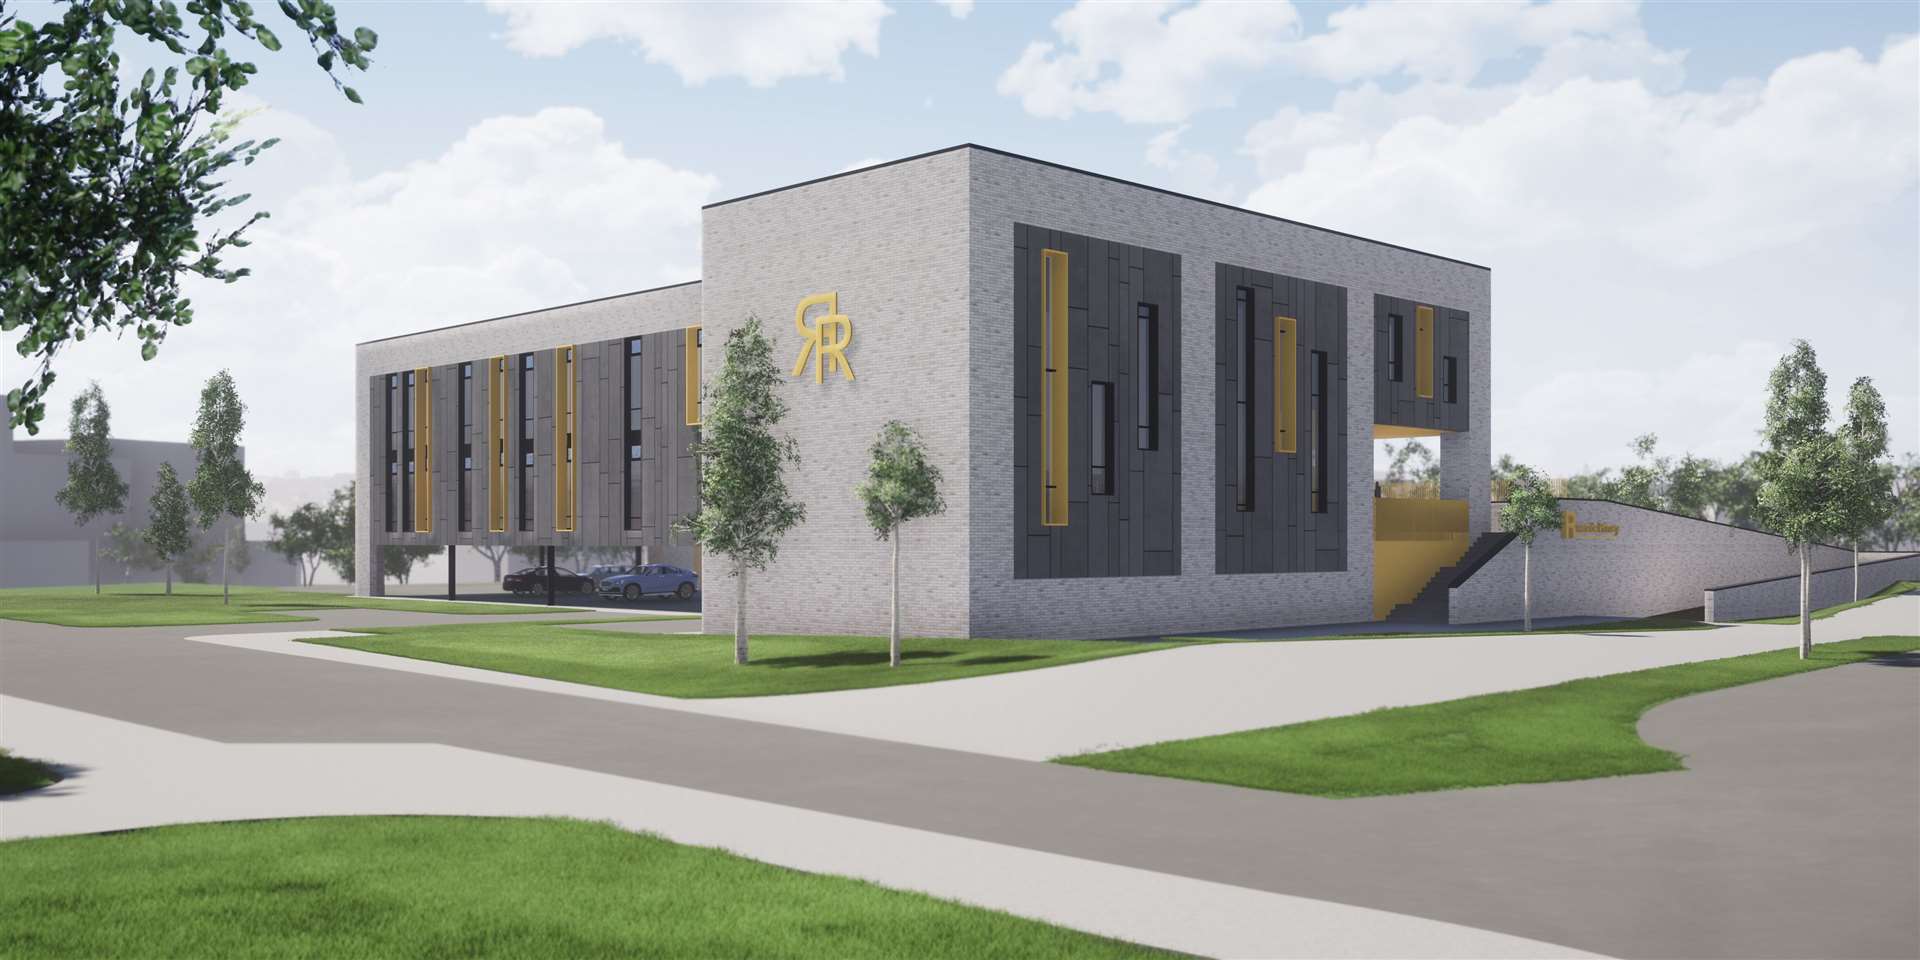 The new school will be located in the parkland area of the £419m development